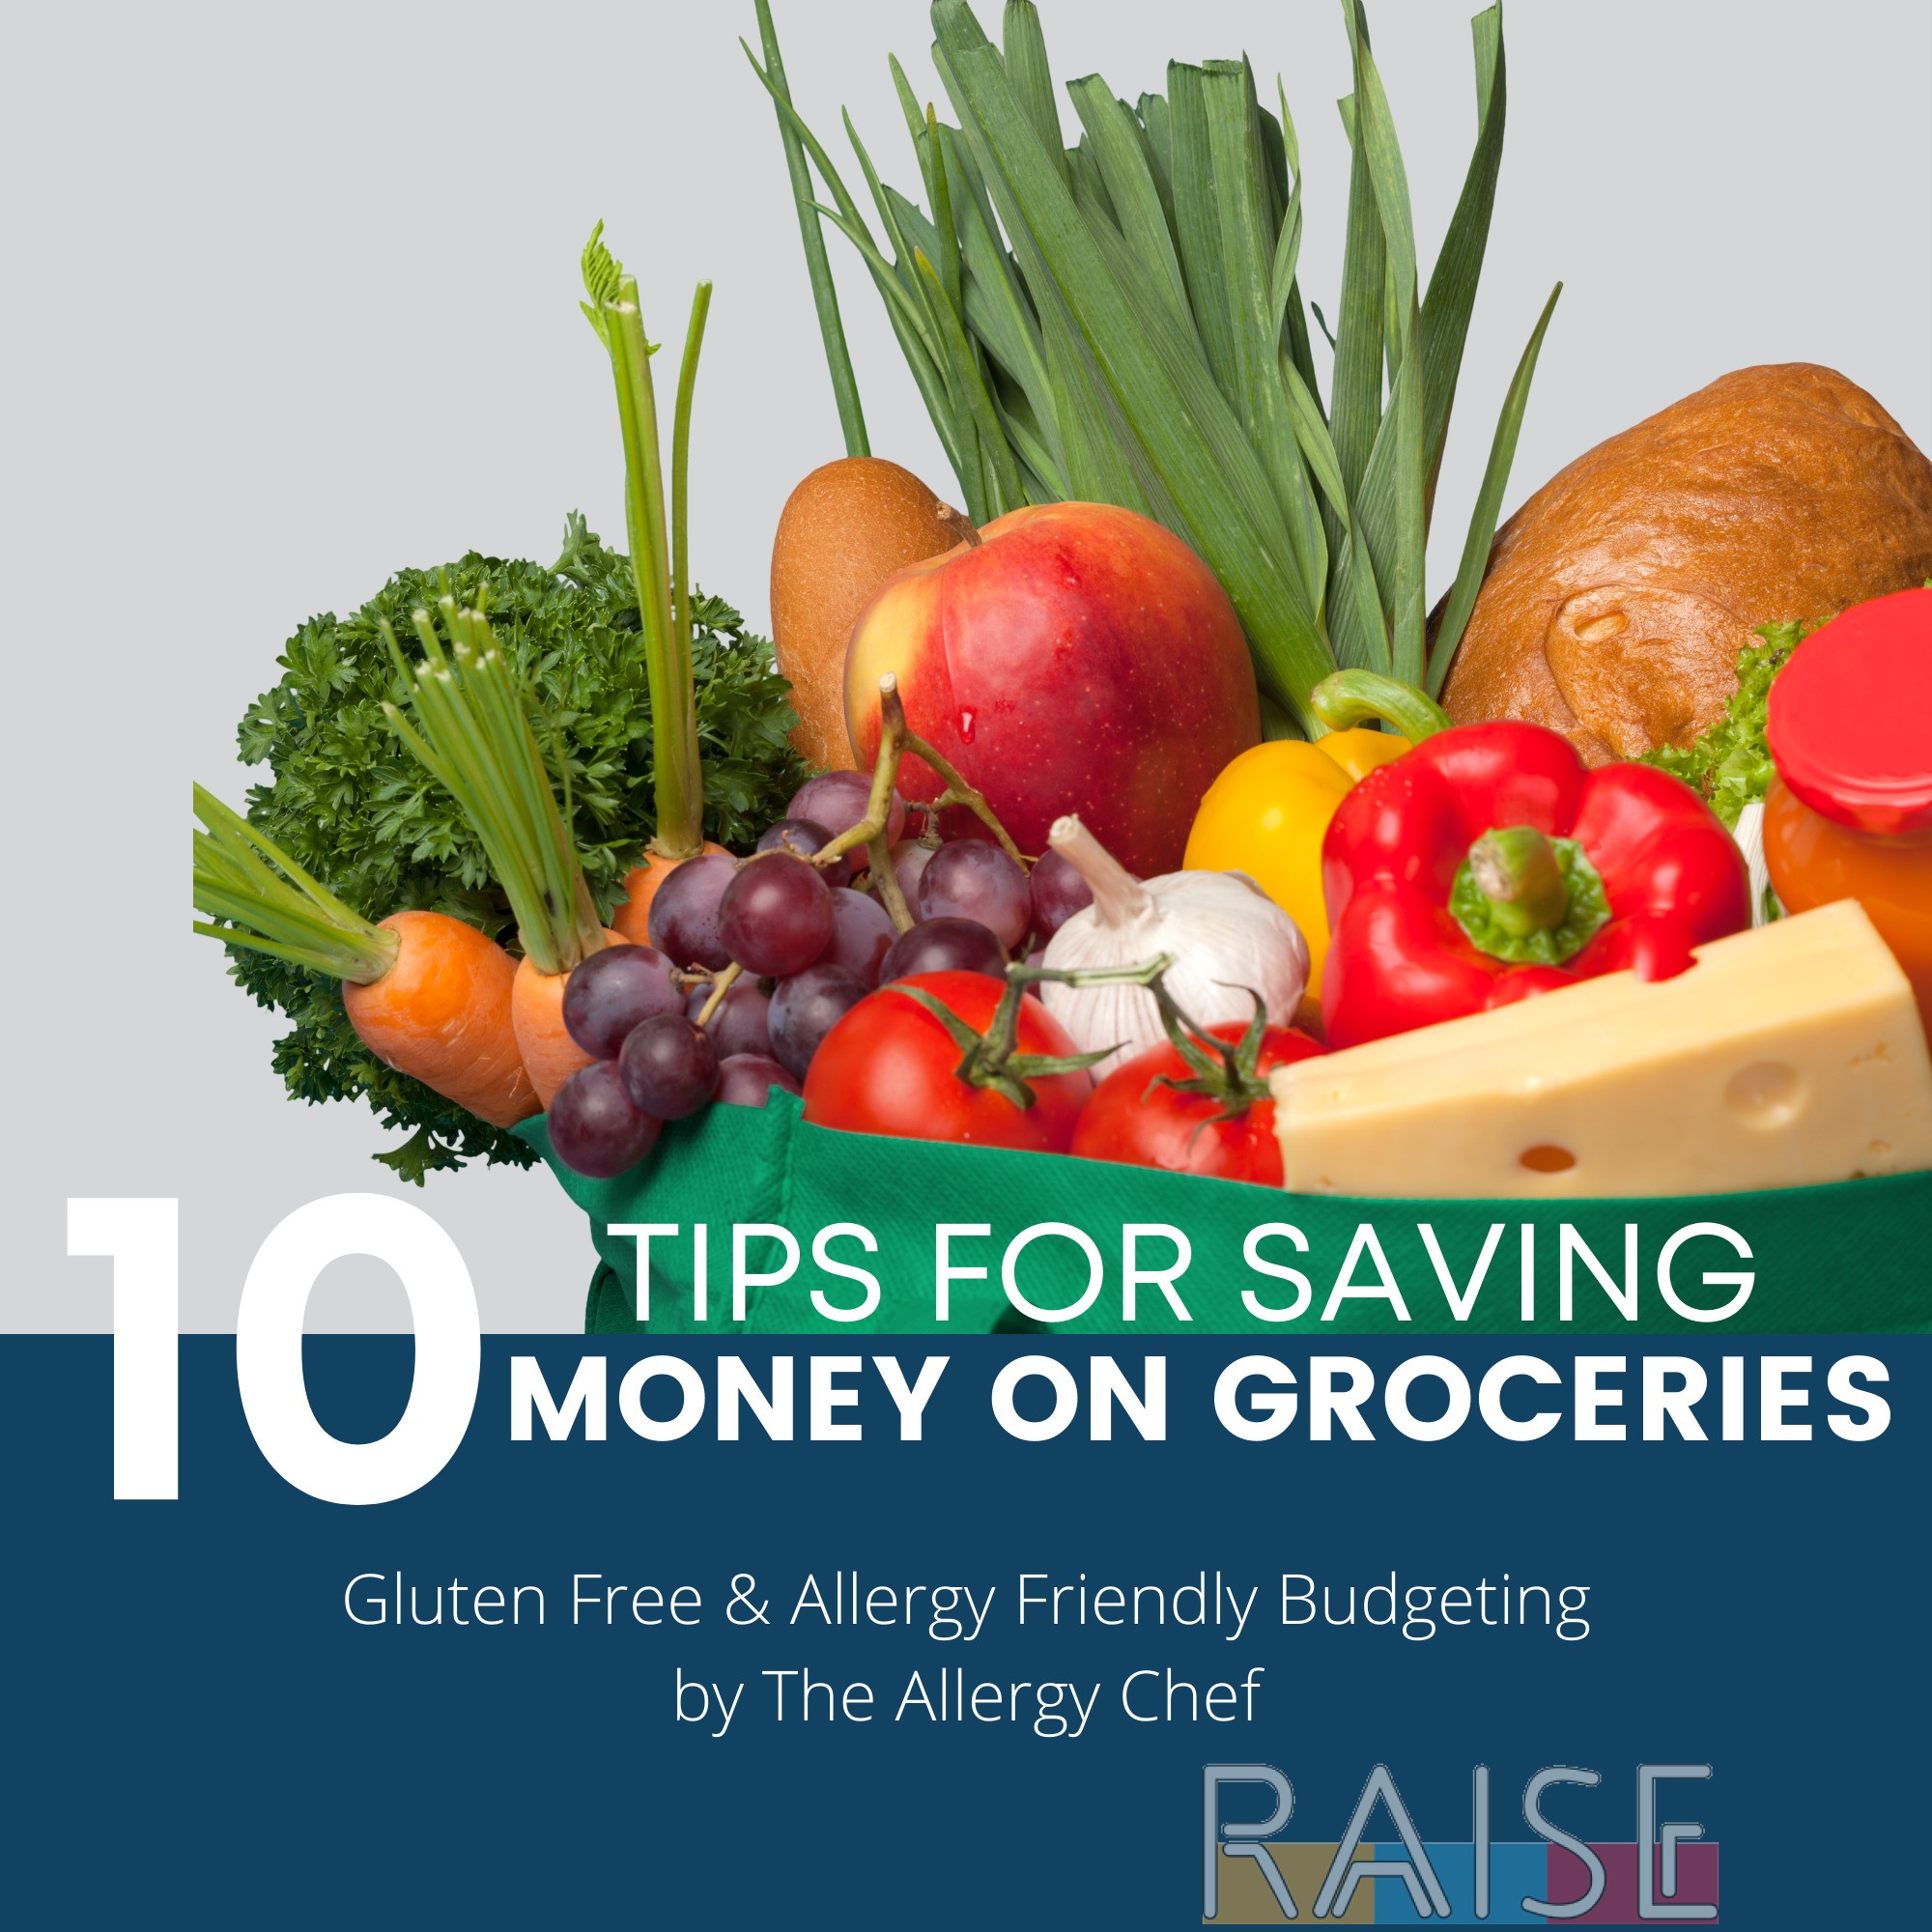 Budget-friendly allergy-friendly options